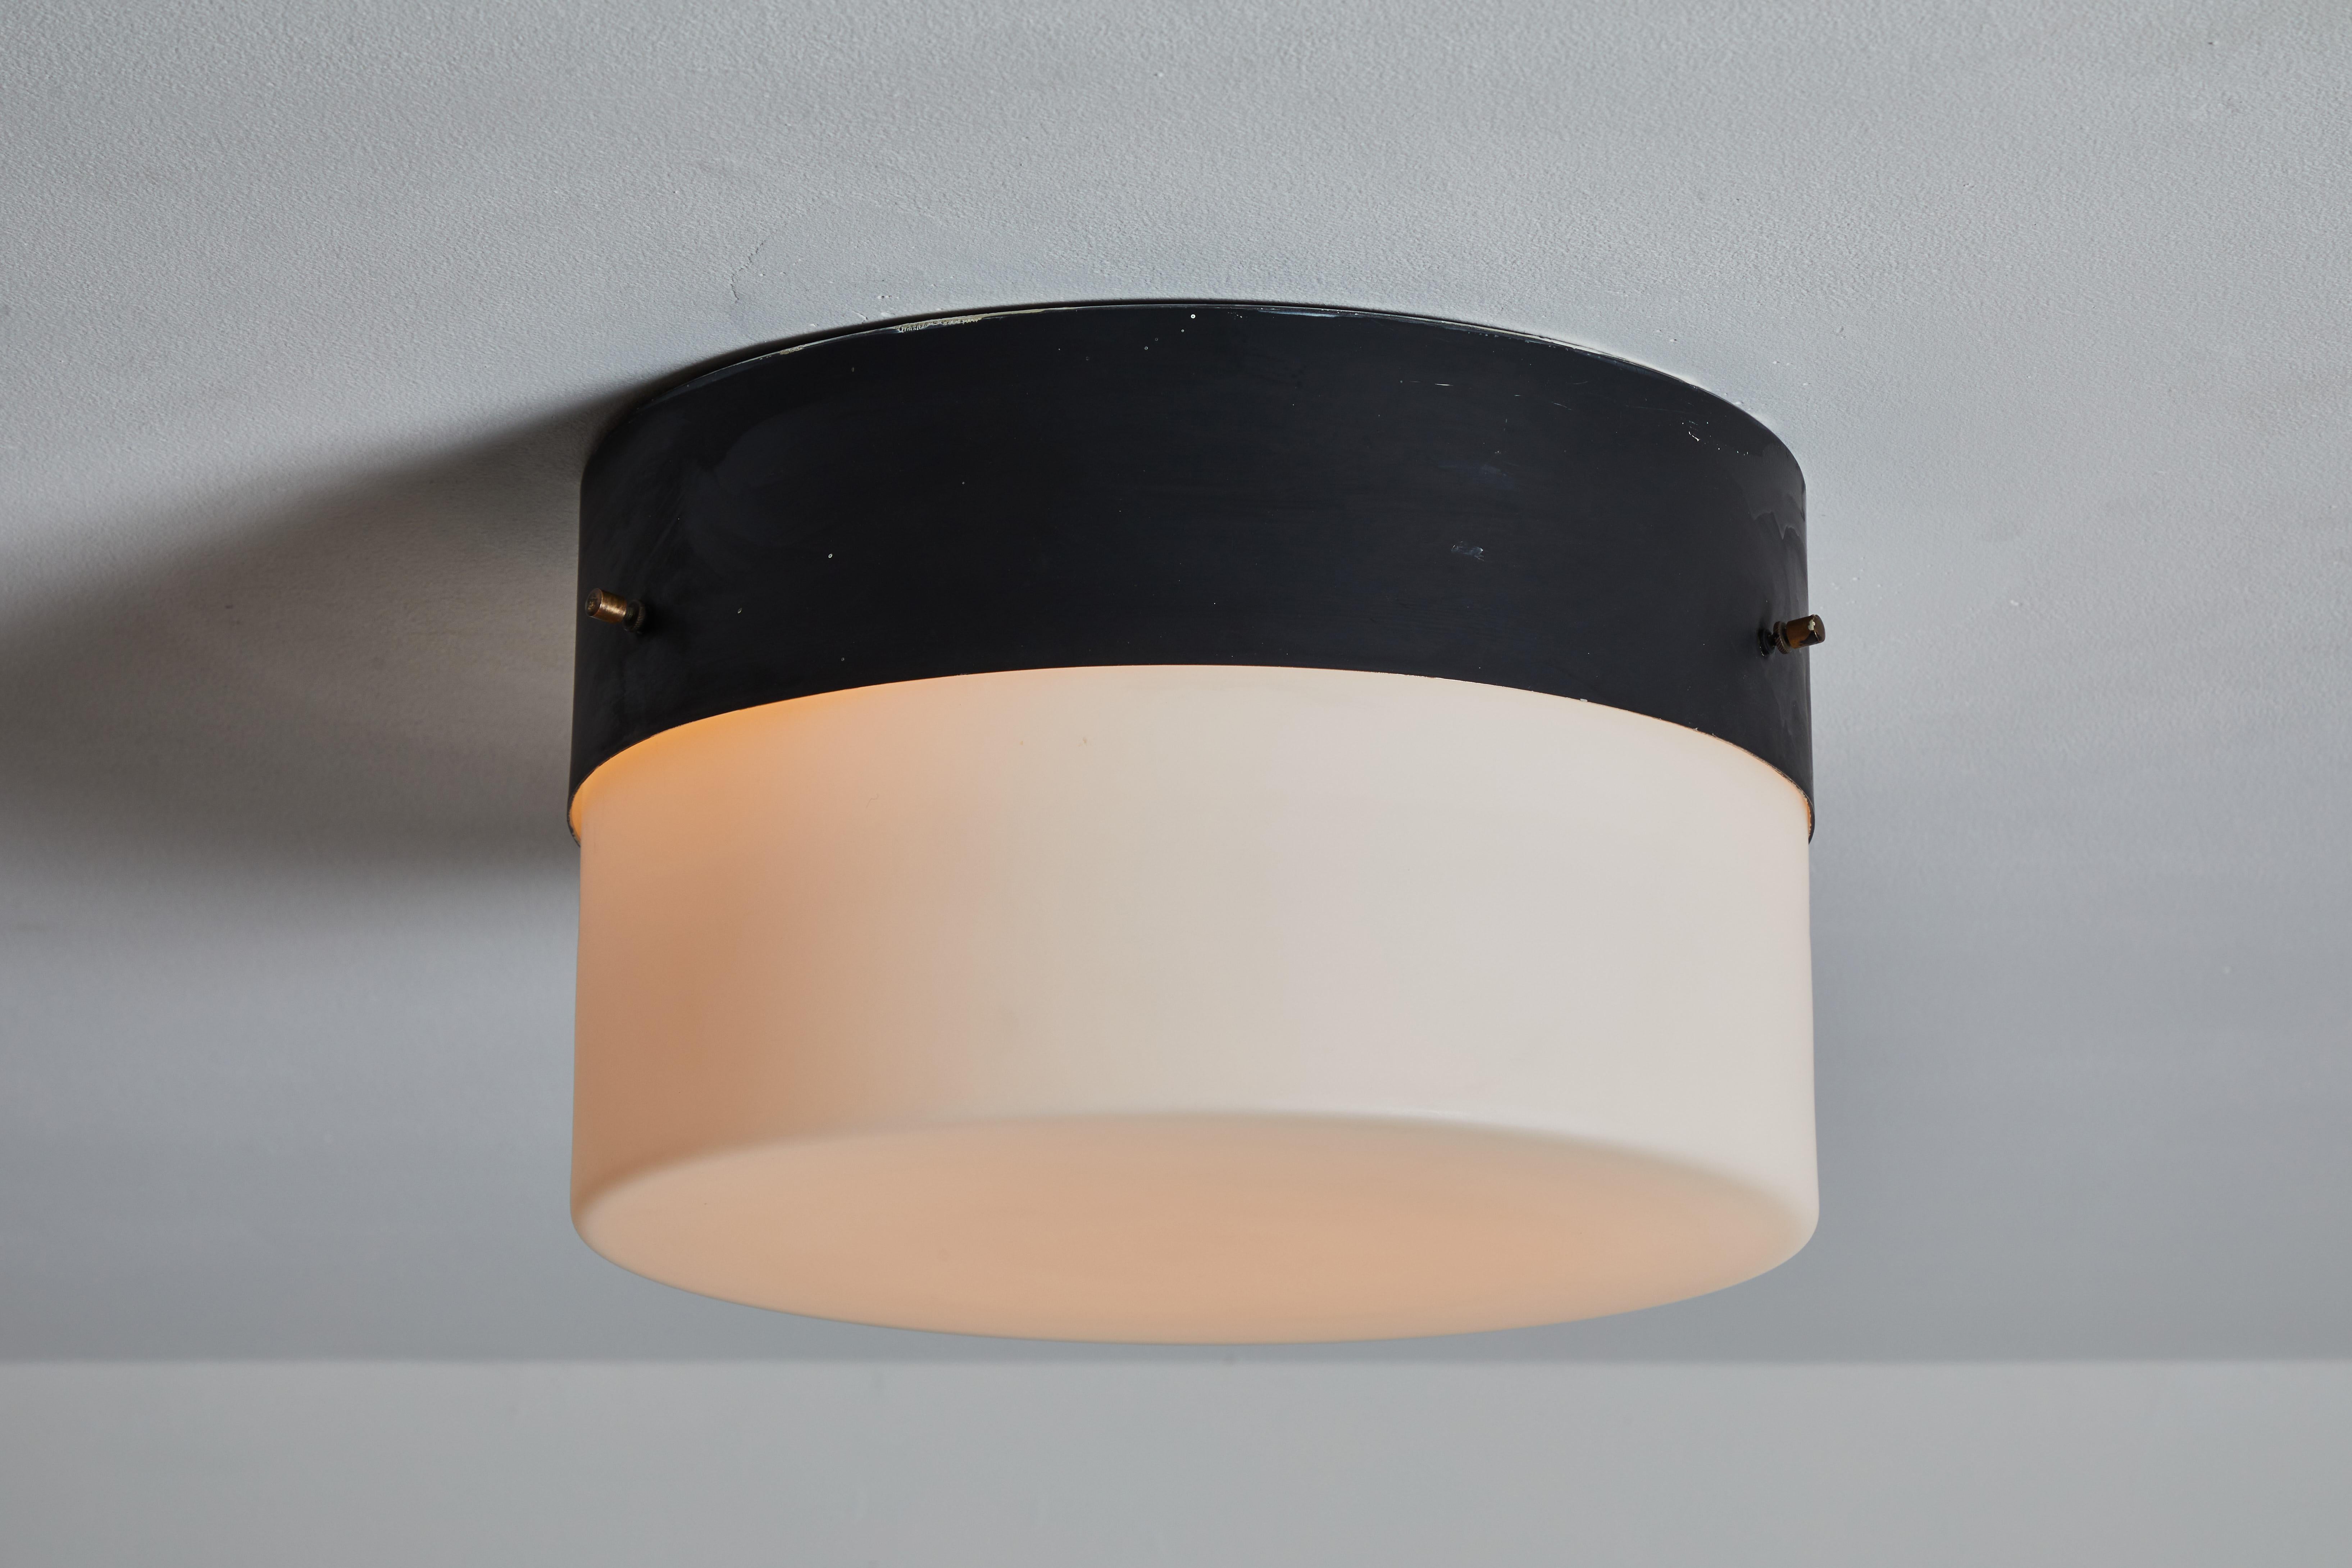 Flush mount lights by Stilnovo. Designed and manufactured in Italy, circa the 1960s. Rewired for U.S. junction boxes. Enameled aluminum with glass diffusers. Each light takes three E27 60w maximum bulbs. Bulbs are provided as a one-time courtesy.